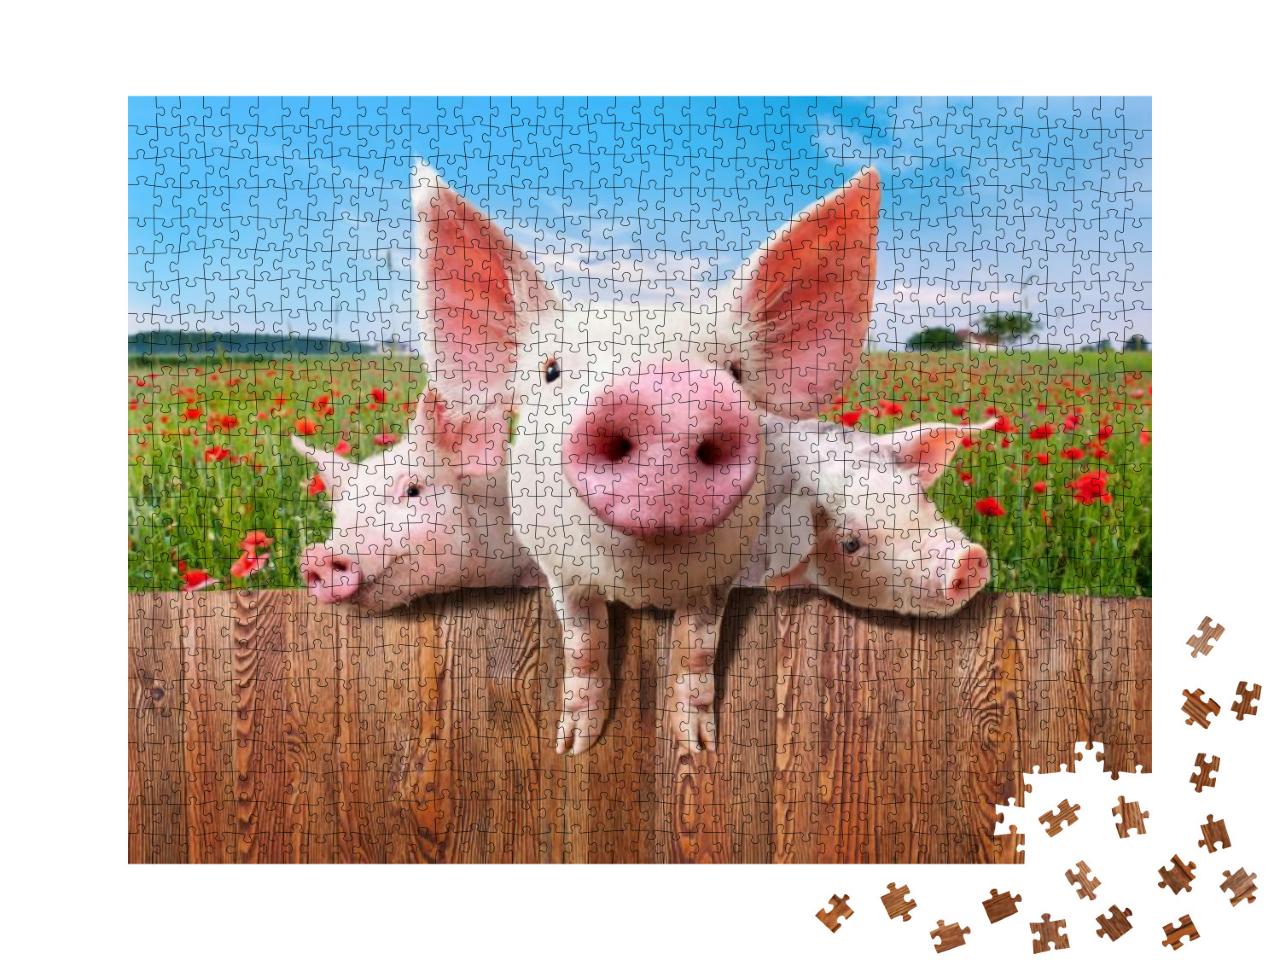 Young Pigs on the Farm Looking Over the Fence... Jigsaw Puzzle with 1000 pieces